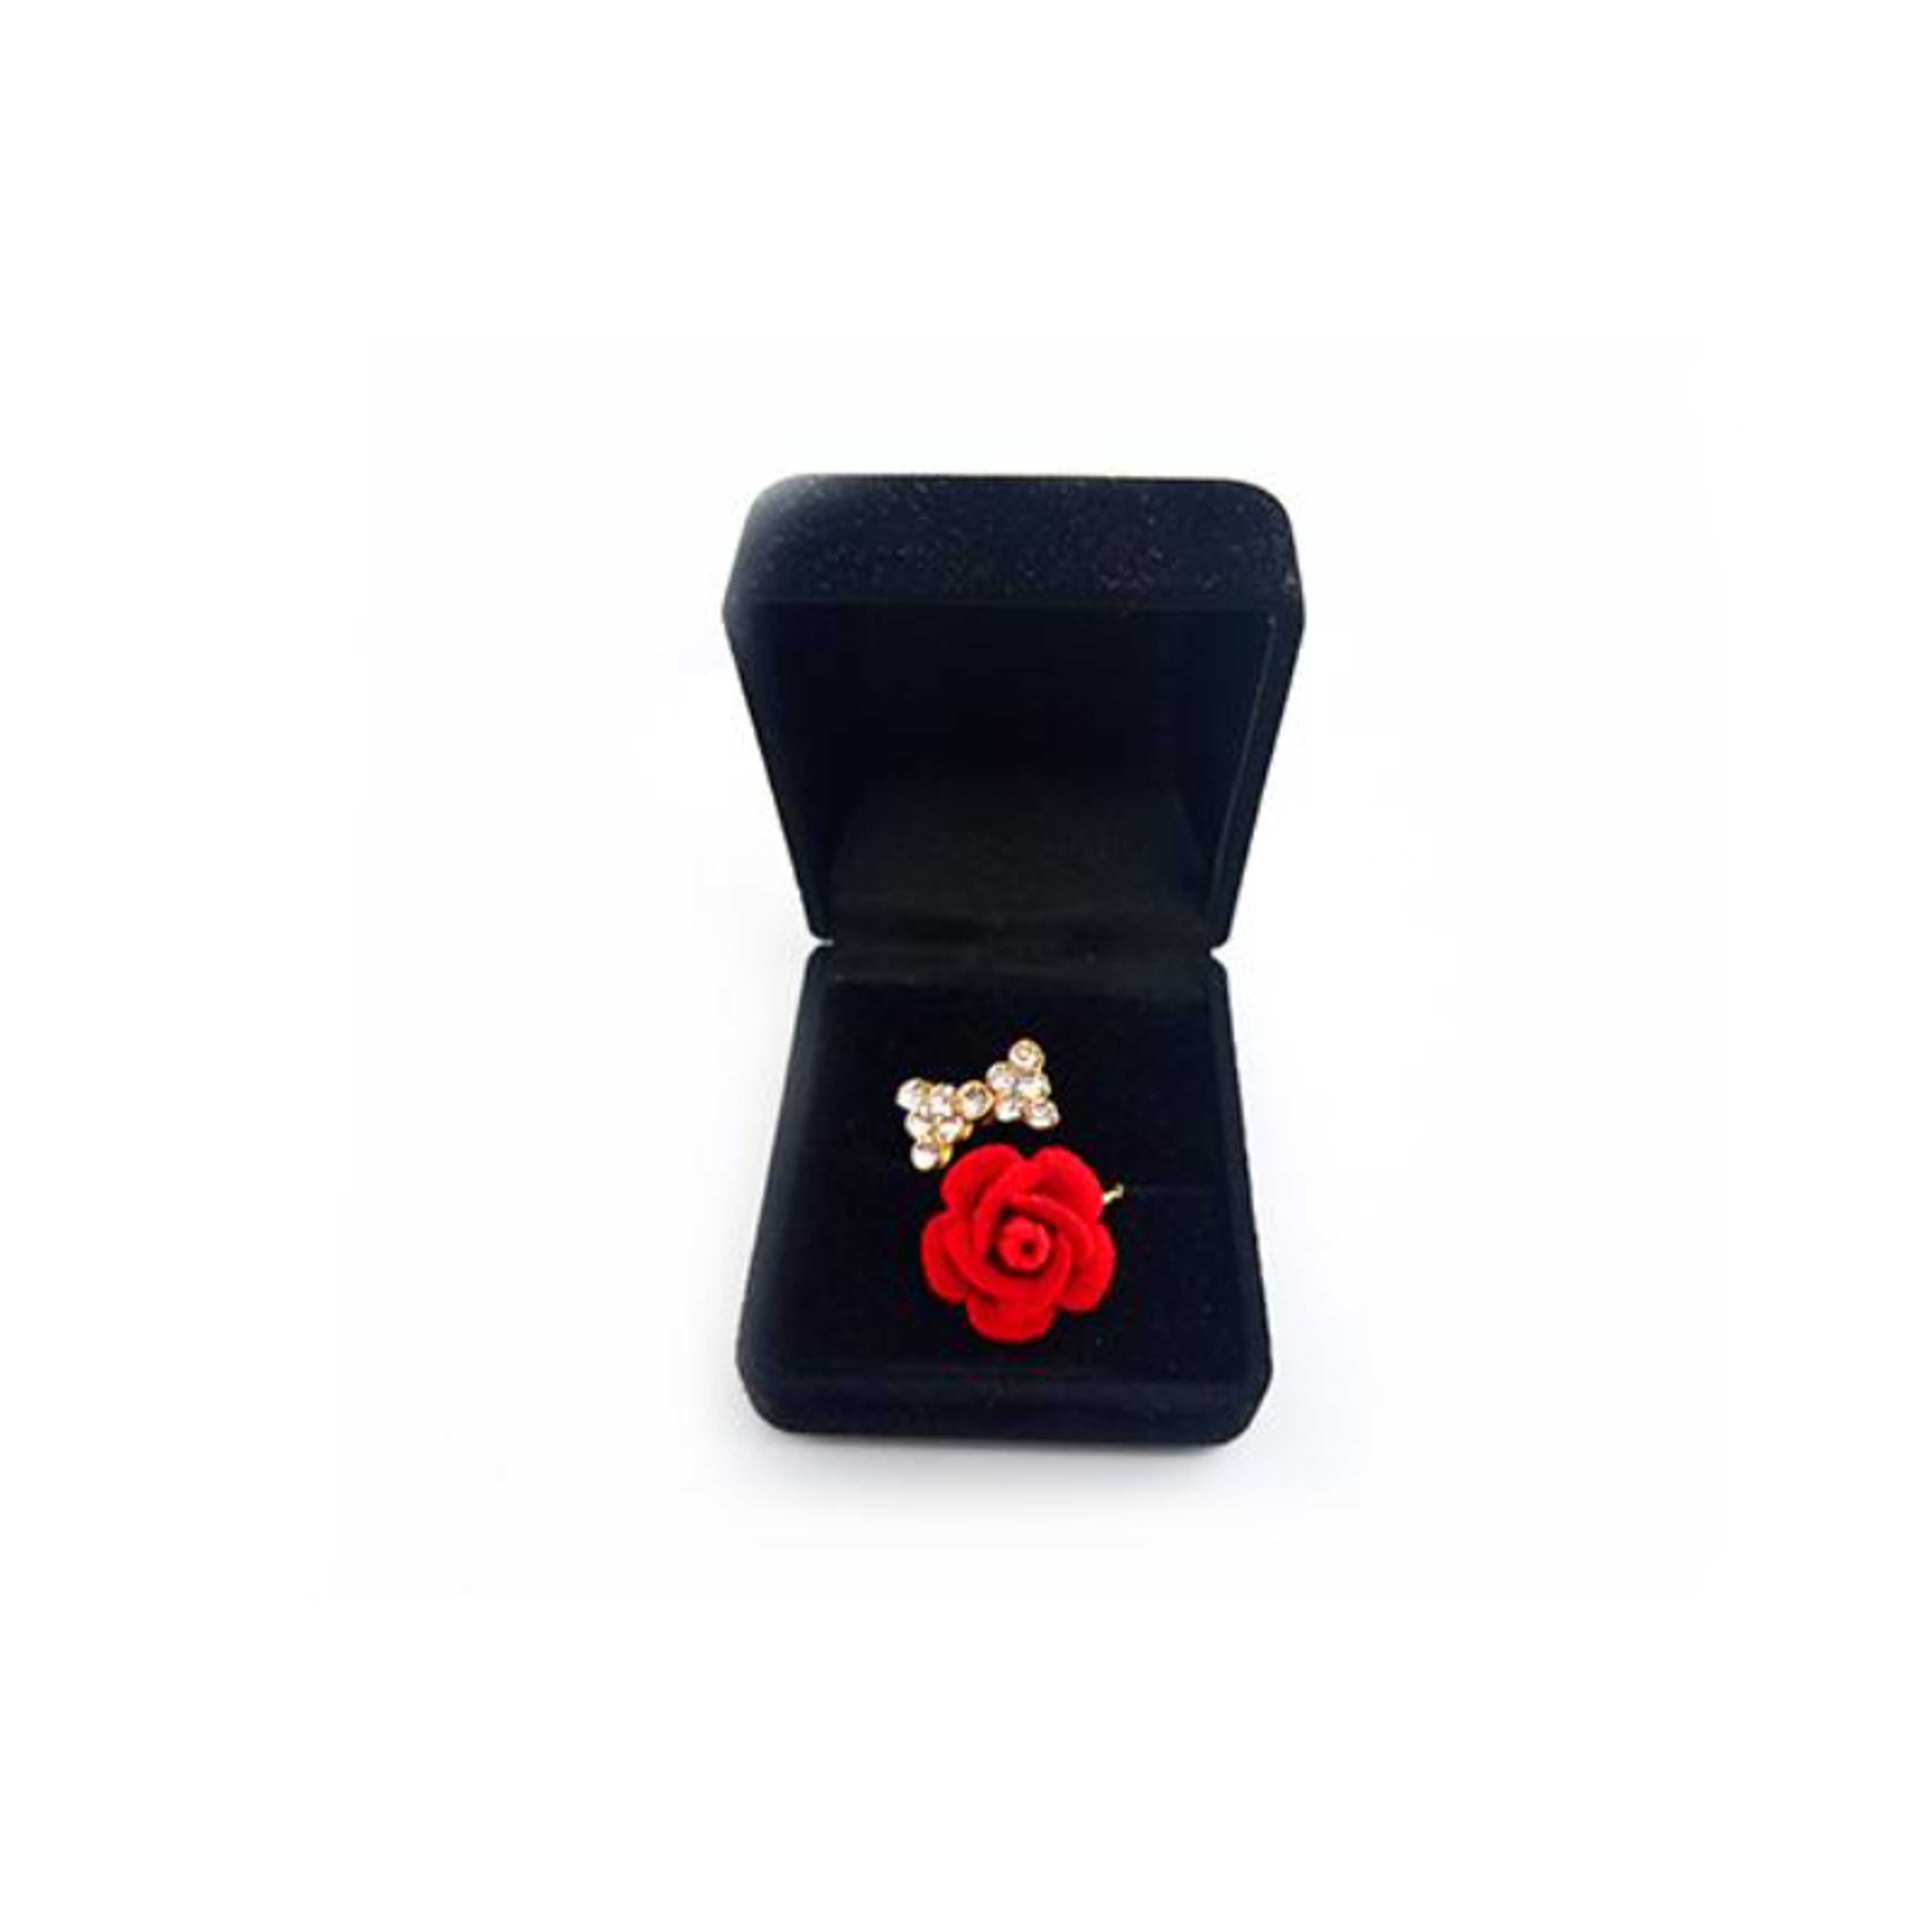 High Quality Stylish Red Love Rose Ring For /women/Girls - 1Piece